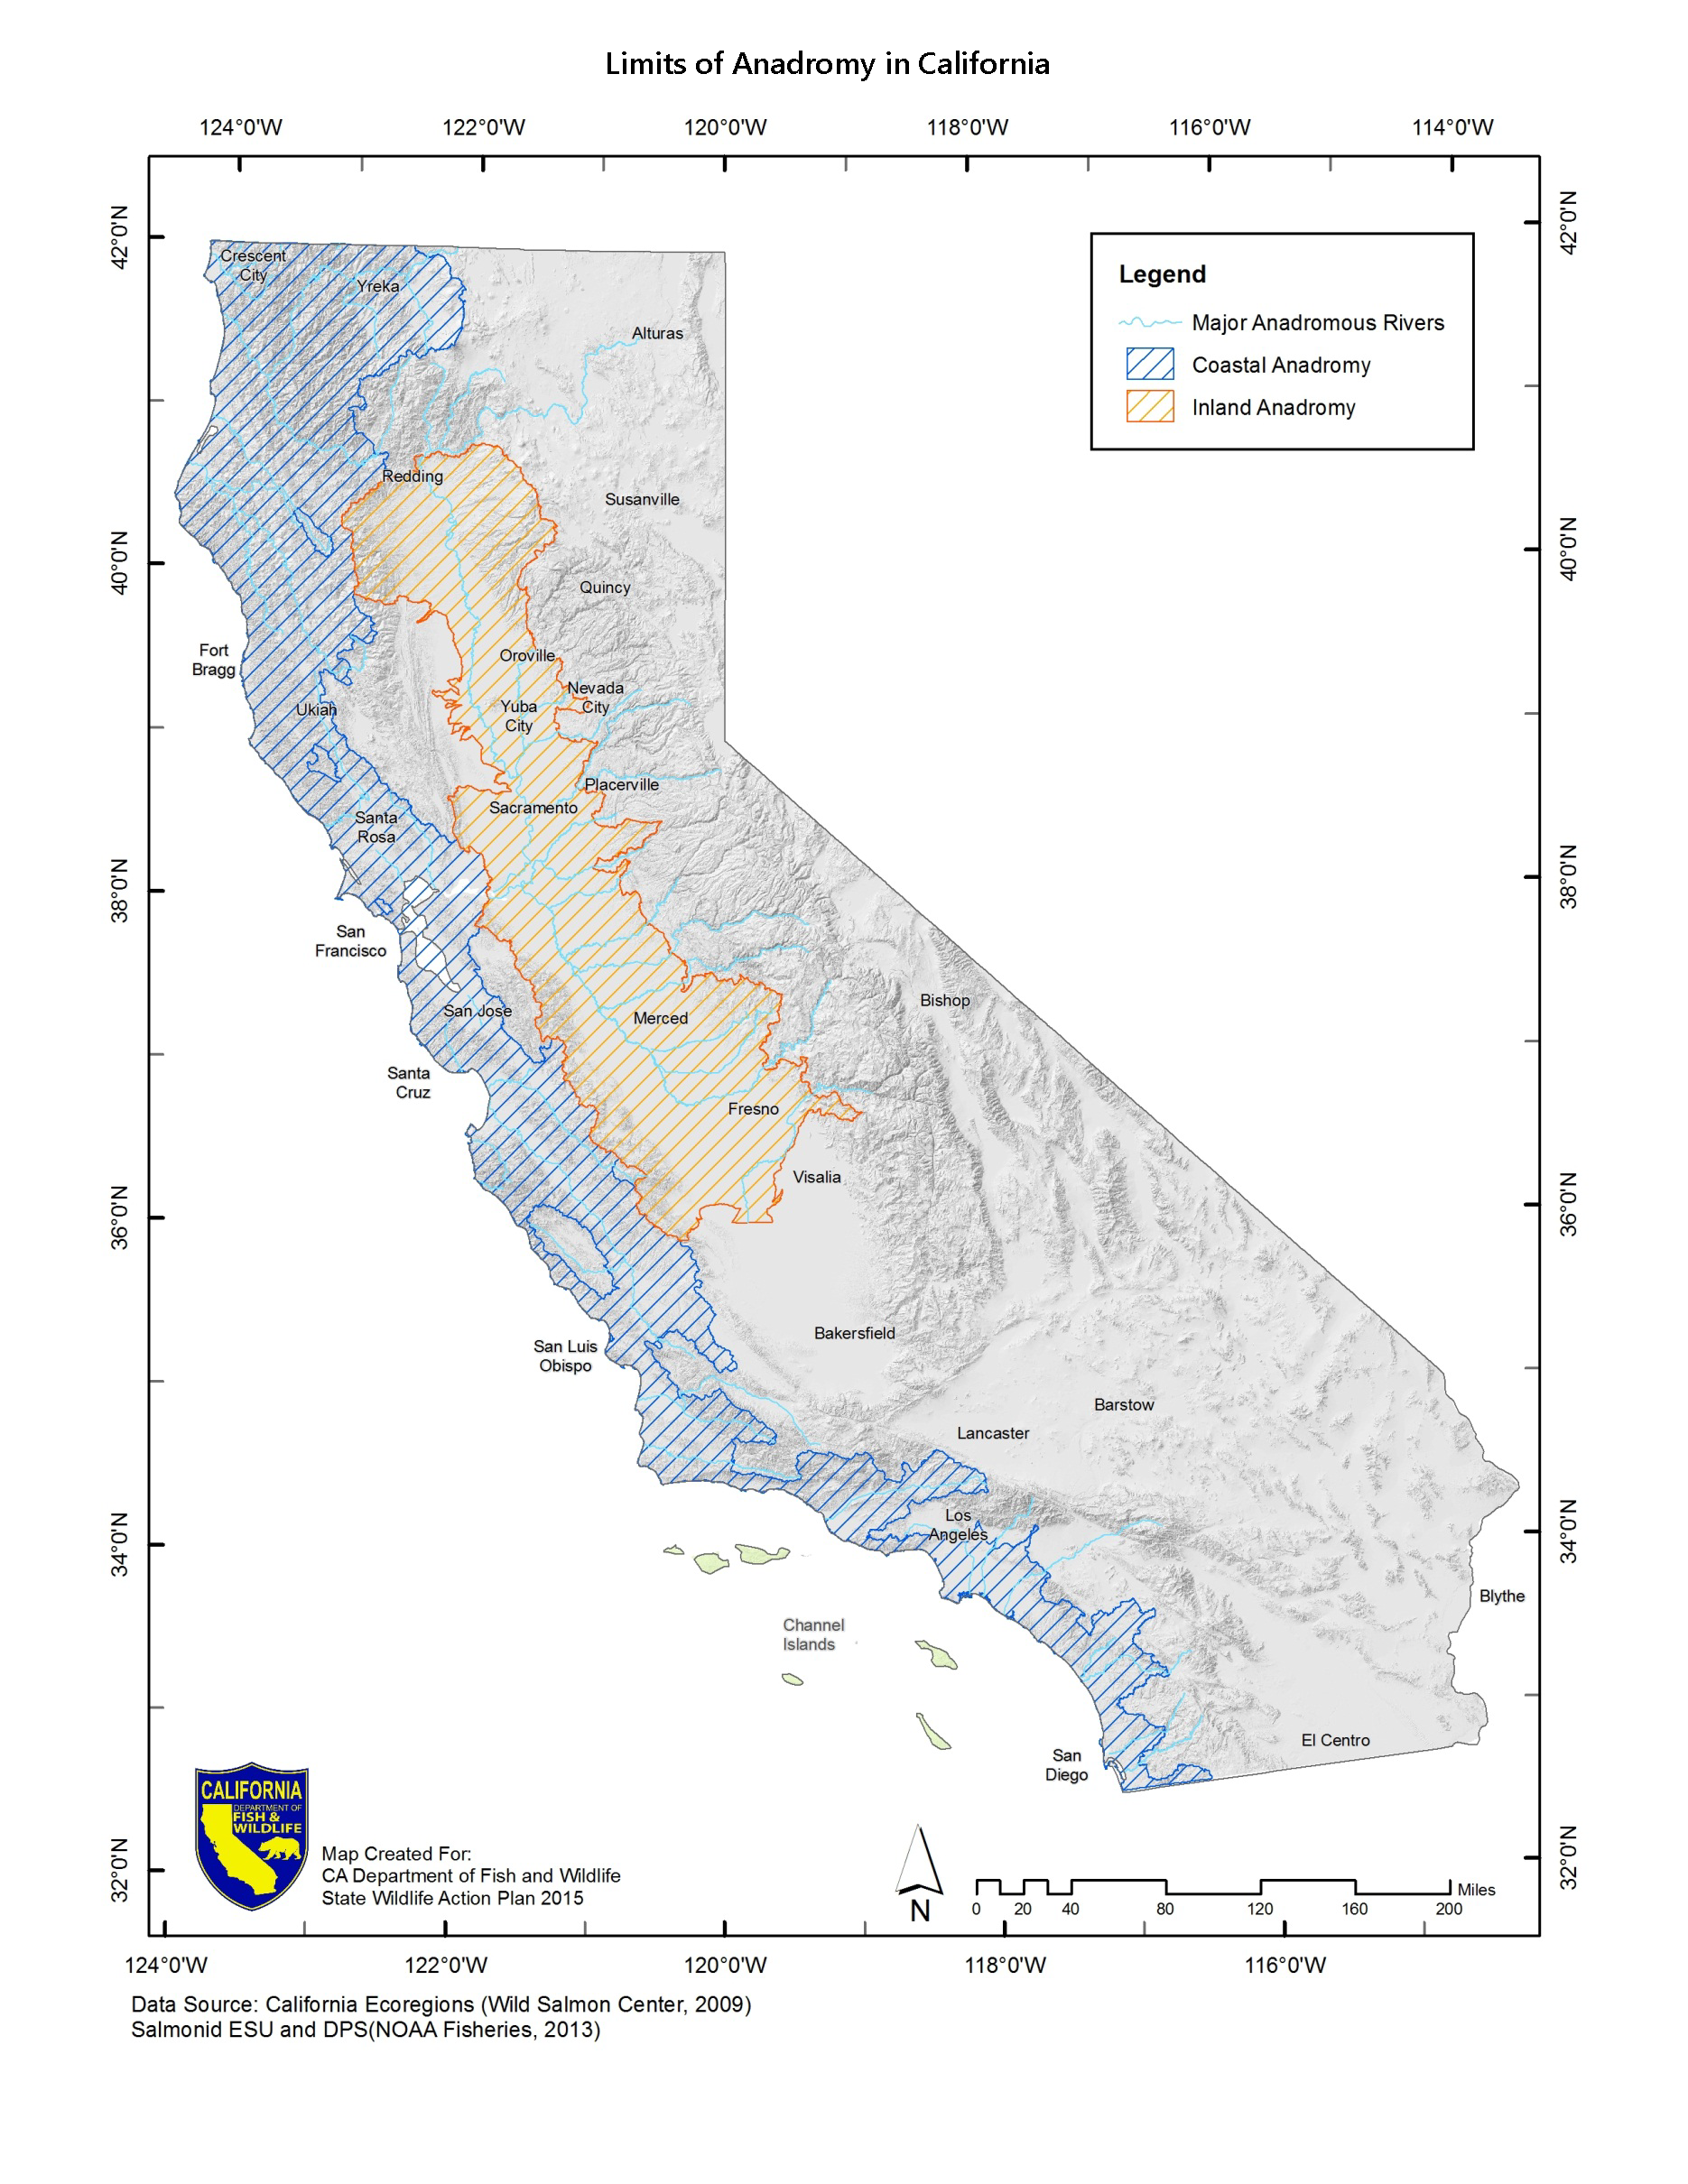 Map of California anadromous waters in coastal watersheds from San Diego to Del Norte counties, San Francisco Bay, Sacramento-San Joaquin Delta, and rivers and streams in the Central Valley.